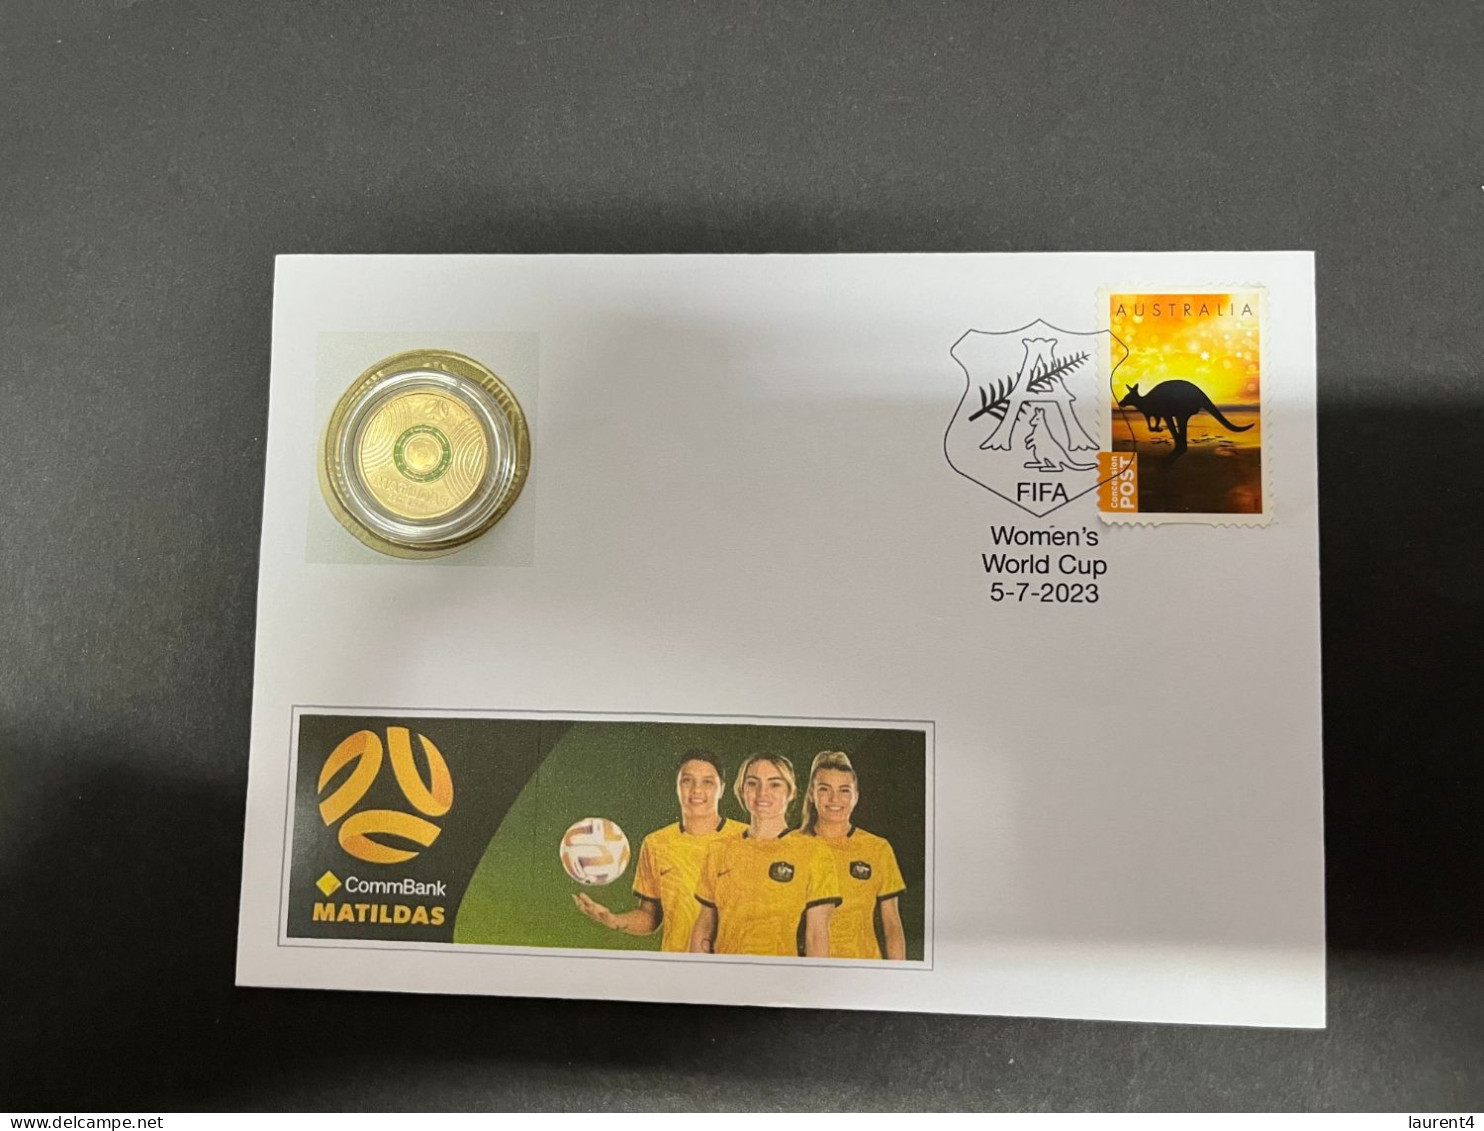 5-7-2023 (1 S  25A) Green $ 2.00 Women's Football  World Cup  - Coloured Coin 2023 On Cover (released 5-7-2023) TODAY - 2 Dollars